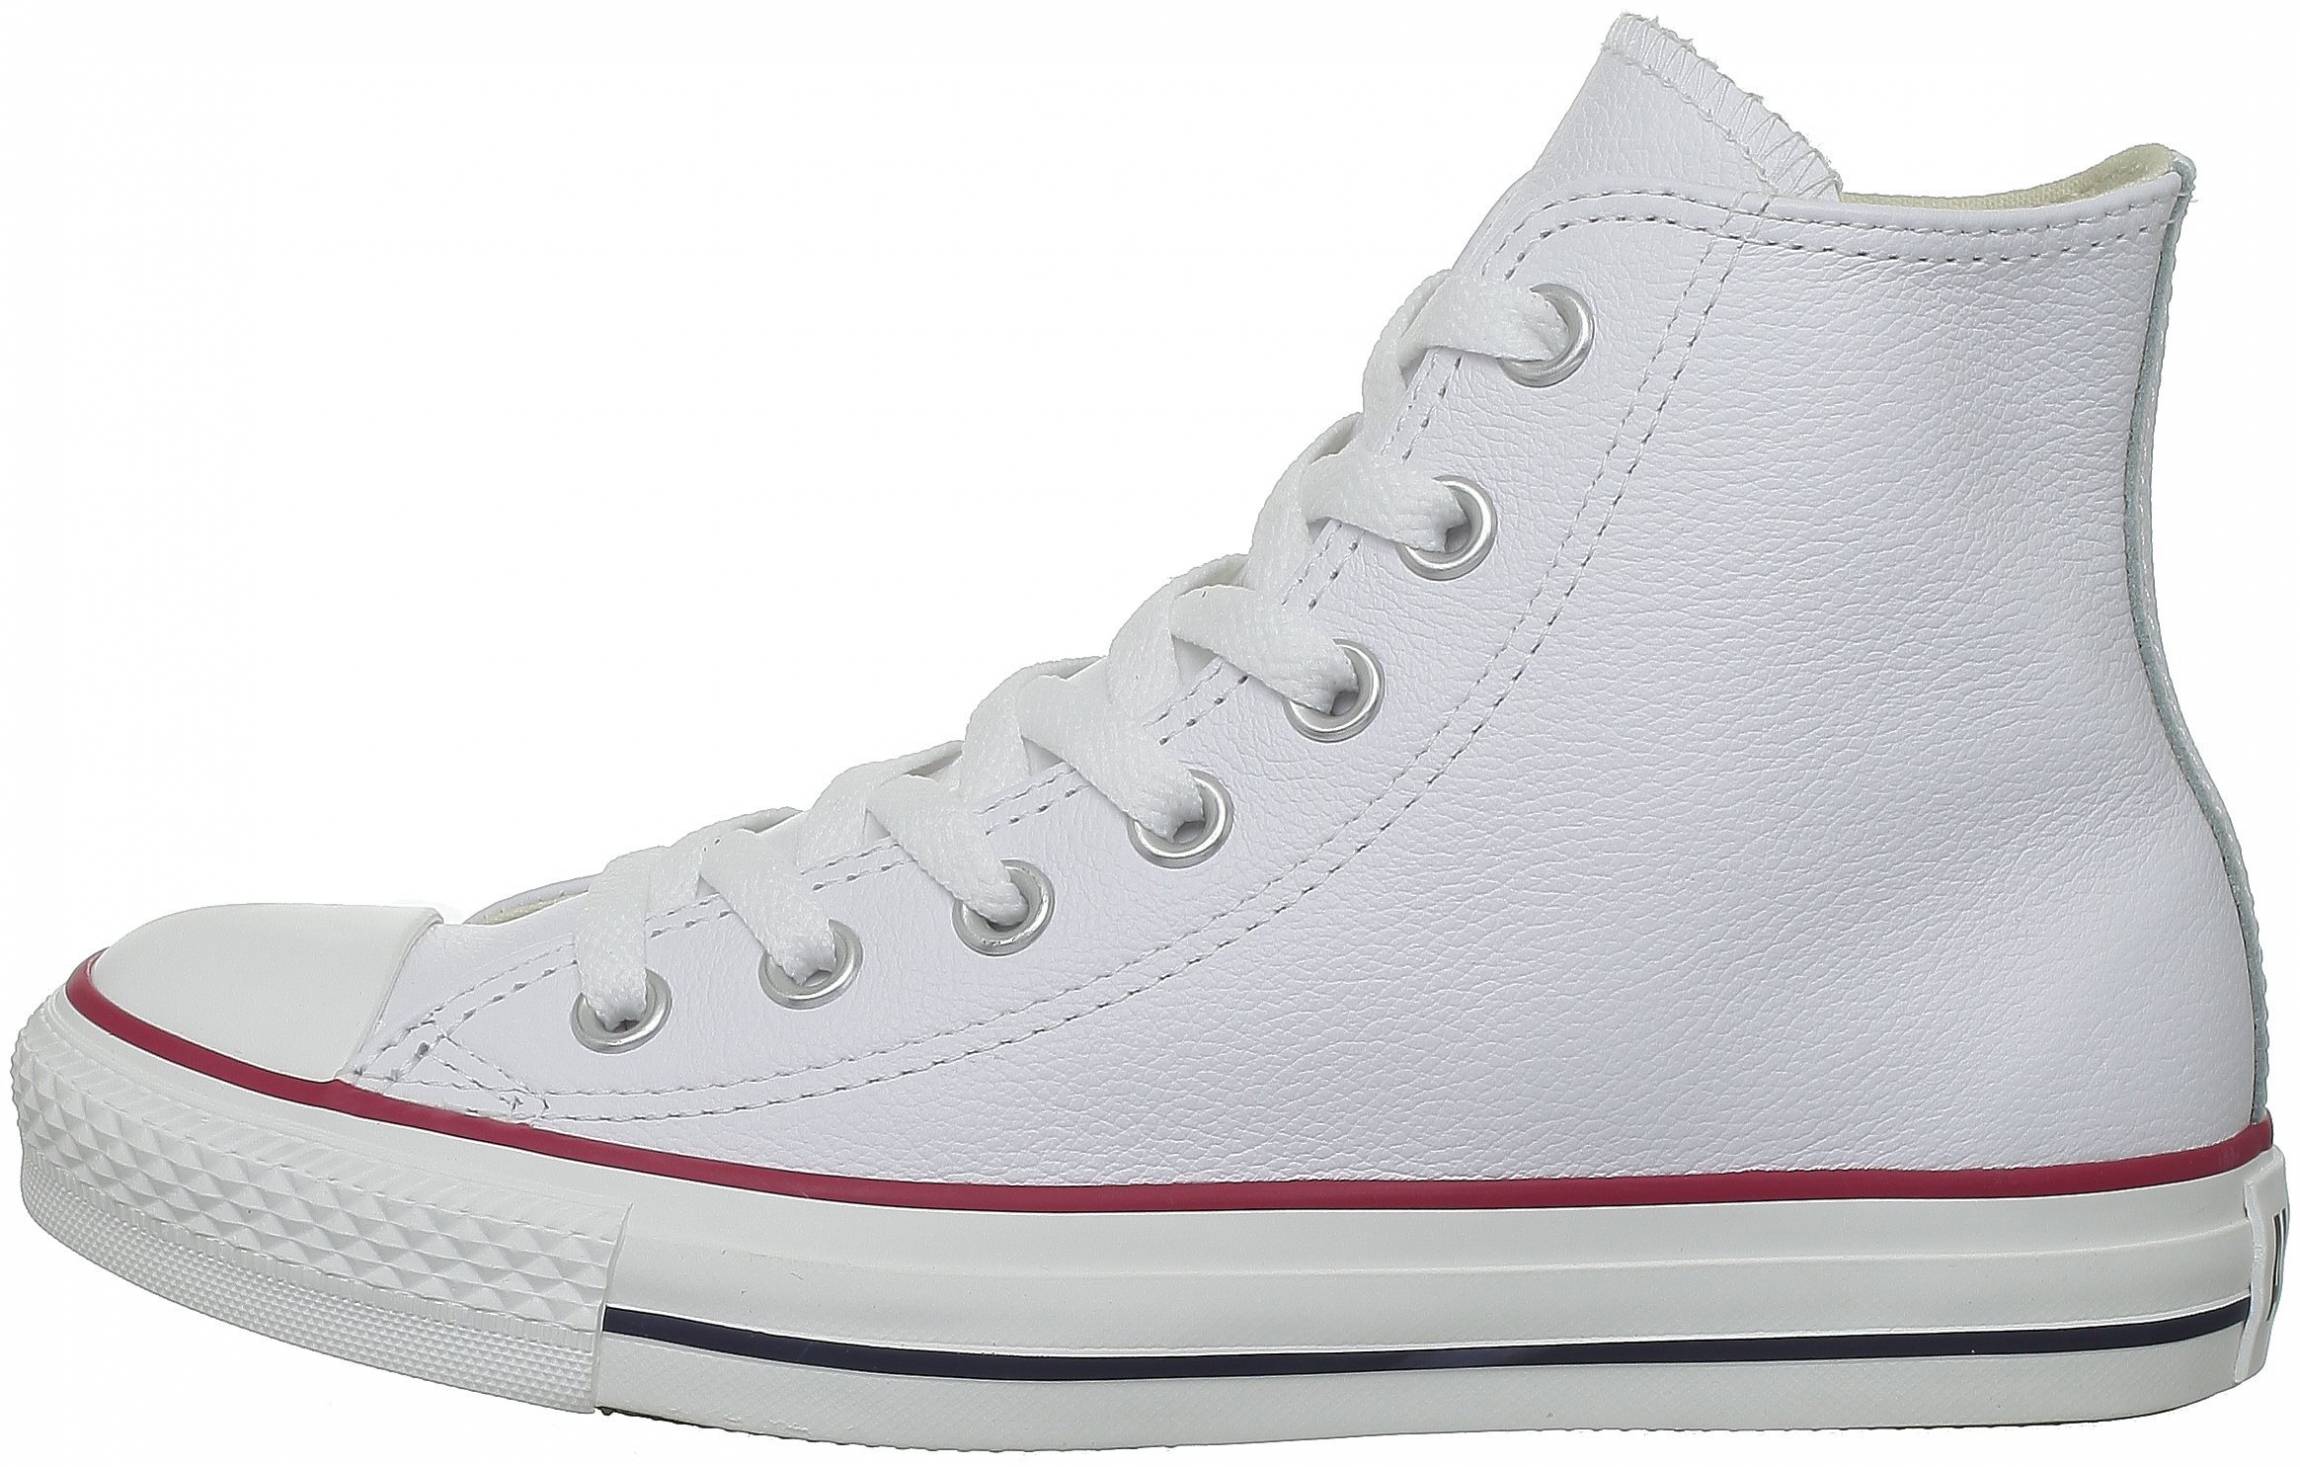 Only $53 + Review of Converse Chuck 